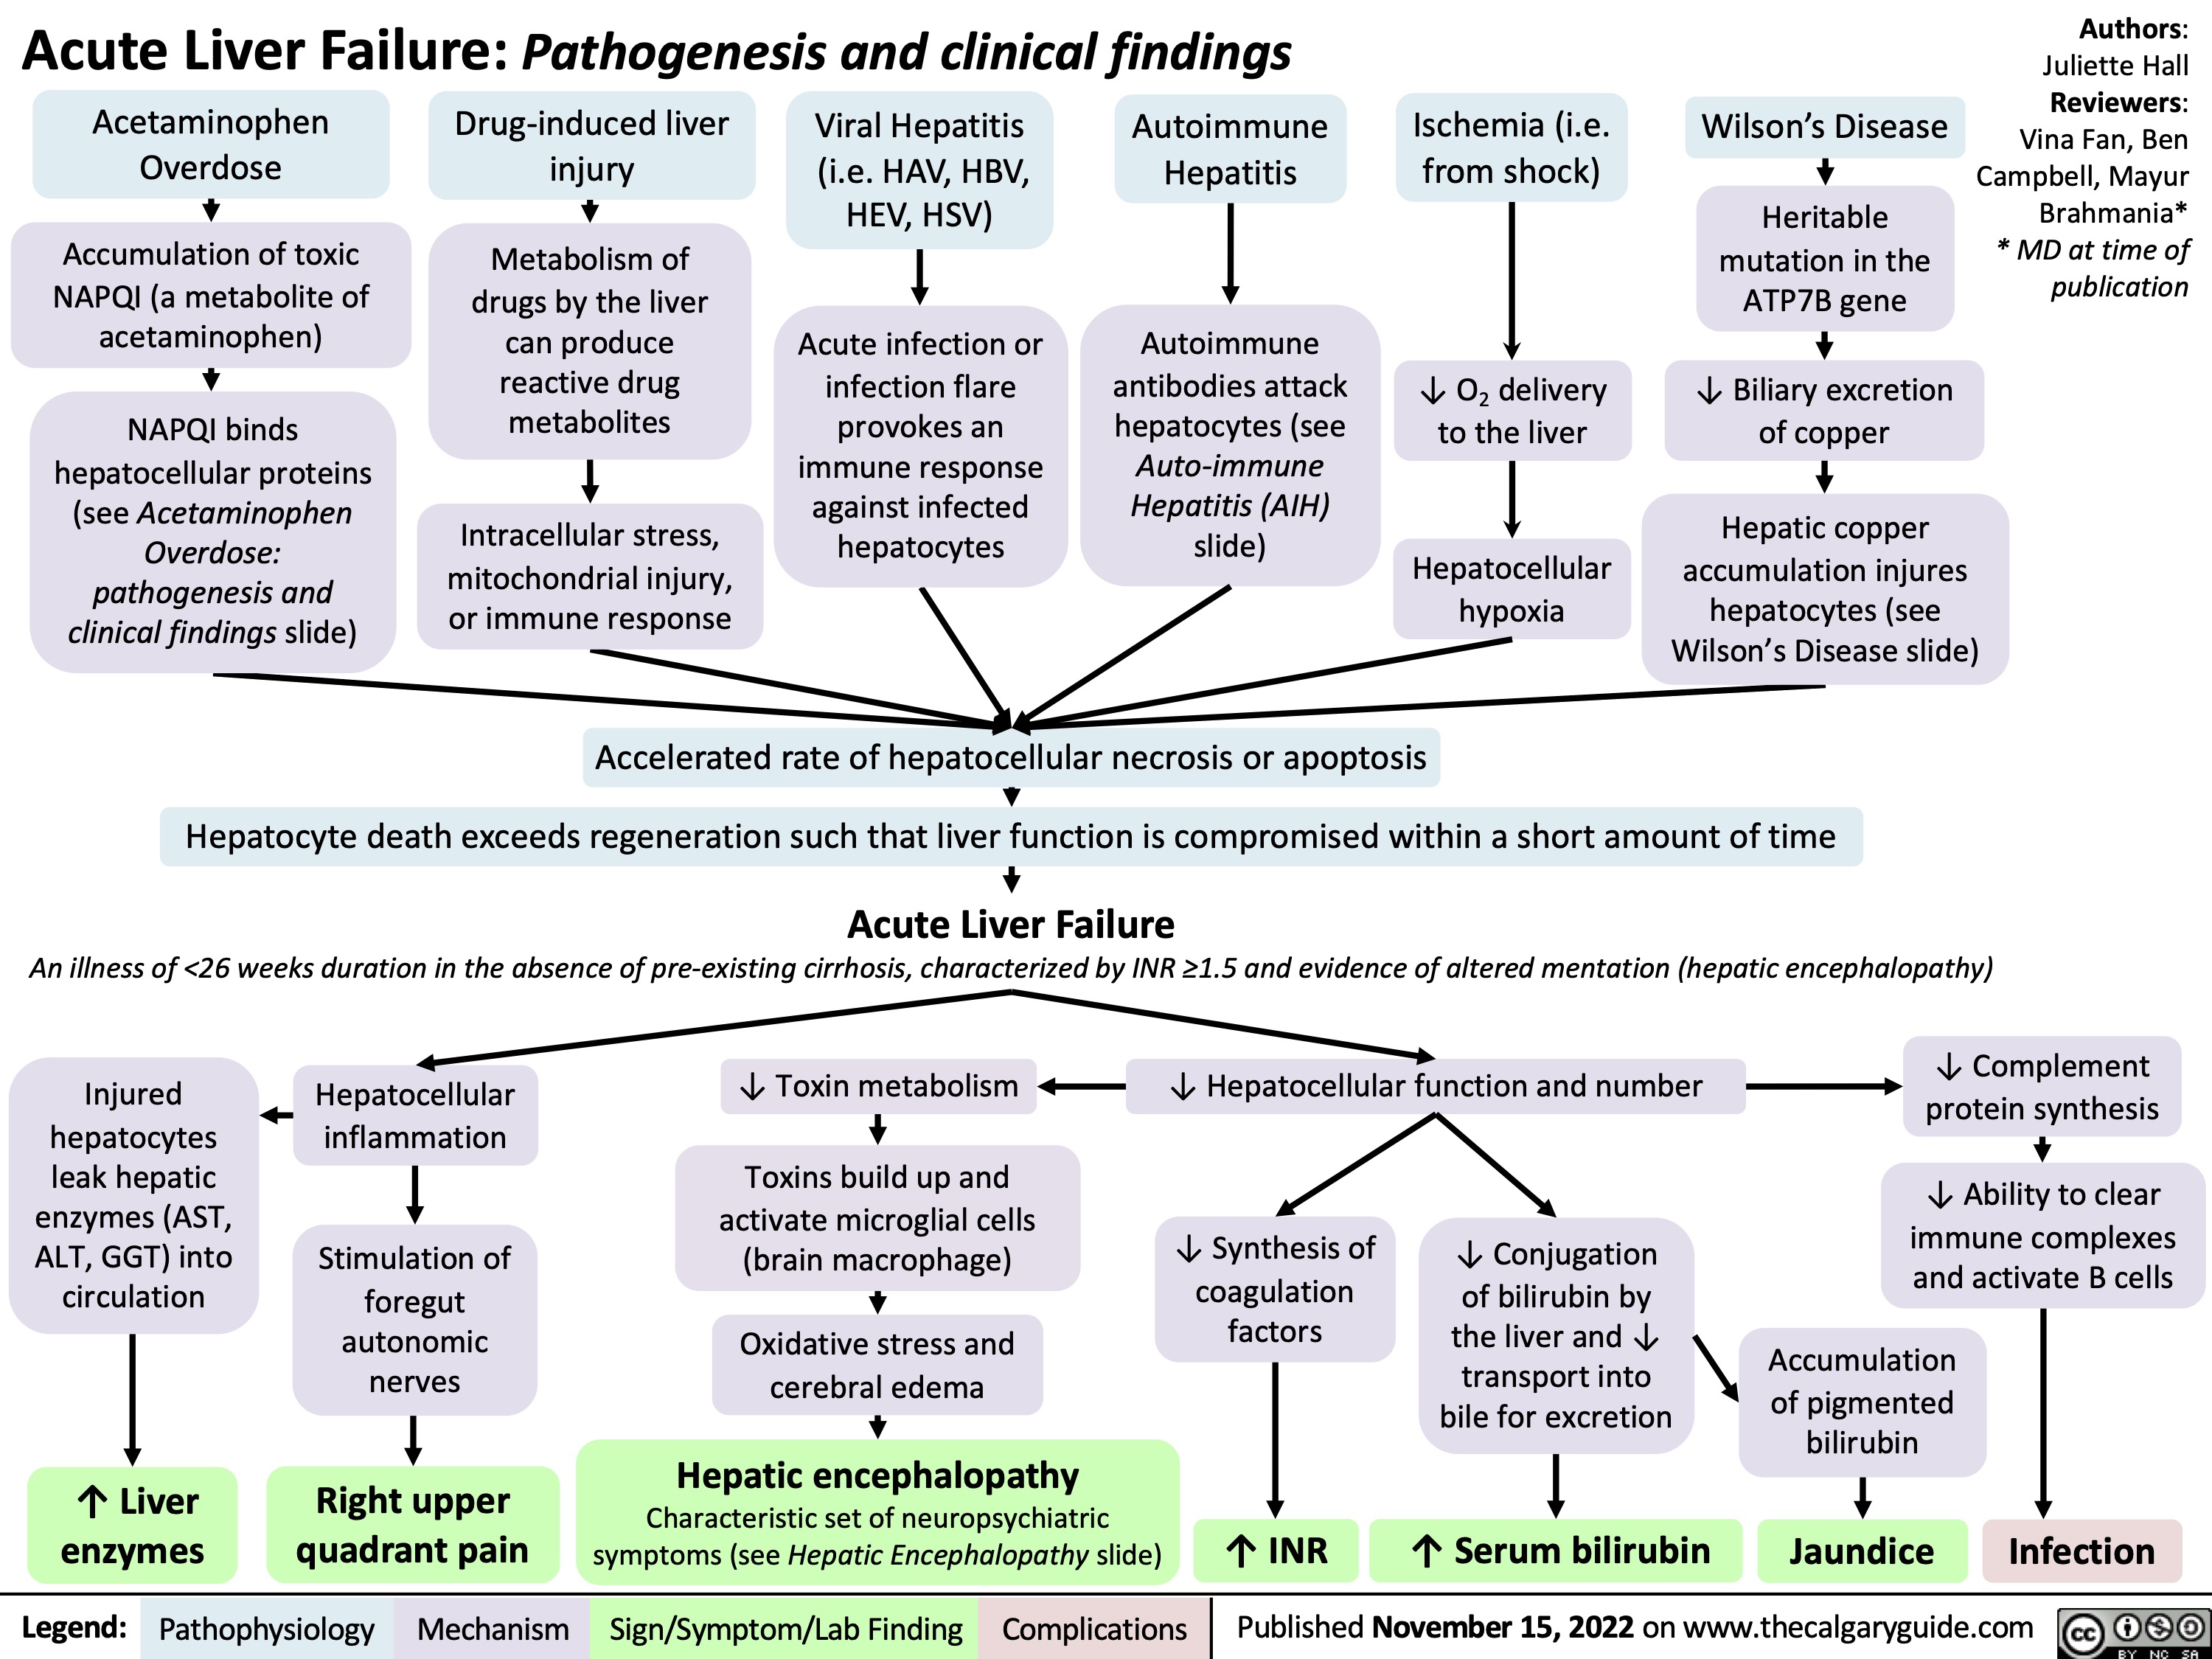 Acute Liver Failure: Pathogenesis and clinical findings
Authors: Juliette Hall Reviewers: Vina Fan, Ben Campbell, Mayur Brahmania* * MD at time of publication
      Acetaminophen Overdose
Accumulation of toxic NAPQI (a metabolite of acetaminophen)
NAPQI binds hepatocellular proteins
(see Acetaminophen Overdose: pathogenesis and clinical findings slide)
Drug-induced liver injury
Metabolism of drugs by the liver can produce reactive drug metabolites
Intracellular stress, mitochondrial injury, or immune response
Viral Hepatitis (i.e. HAV, HBV, HEV, HSV)
Acute infection or infection flare provokes an immune response against infected hepatocytes
Autoimmune Hepatitis
Autoimmune antibodies attack hepatocytes (see Auto-immune Hepatitis (AIH) slide)
Ischemia (i.e. from shock)
↓ O2 delivery to the liver
Hepatocellular hypoxia
Wilson’s Disease
Heritable mutation in the ATP7B gene
↓ Biliary excretion of copper
            Hepatic copper accumulation injures hepatocytes (see Wilson’s Disease slide)
       Accelerated rate of hepatocellular necrosis or apoptosis
 Hepatocyte death exceeds regeneration such that liver function is compromised within a short amount of time
Acute Liver Failure
An illness of <26 weeks duration in the absence of pre-existing cirrhosis, characterized by INR ≥1.5 and evidence of altered mentation (hepatic encephalopathy)
       Injured hepatocytes leak hepatic enzymes (AST, ALT, GGT) into circulation
↑ Liver enzymes
Hepatocellular inflammation
Stimulation of foregut
autonomic nerves
Right upper quadrant pain
↓ Toxin metabolism
Toxins build up and activate microglial cells (brain macrophage)
Oxidative stress and cerebral edema
Hepatic encephalopathy
Characteristic set of neuropsychiatric symptoms (see Hepatic Encephalopathy slide)
↓ Hepatocellular function and number
↓ Complement protein synthesis
↓ Ability to clear immune complexes and activate B cells
Accumulation of pigmented bilirubin
        ↓ Synthesis of coagulation factors
↑ INR
↓ Conjugation of bilirubin by the liver and ↓ transport into bile for excretion
            ↑ Serum bilirubin
Jaundice
Infection
 Legend:
 Pathophysiology
 Mechanism
Sign/Symptom/Lab Finding
 Complications
Published November 15, 2022 on www.thecalgaryguide.com
   